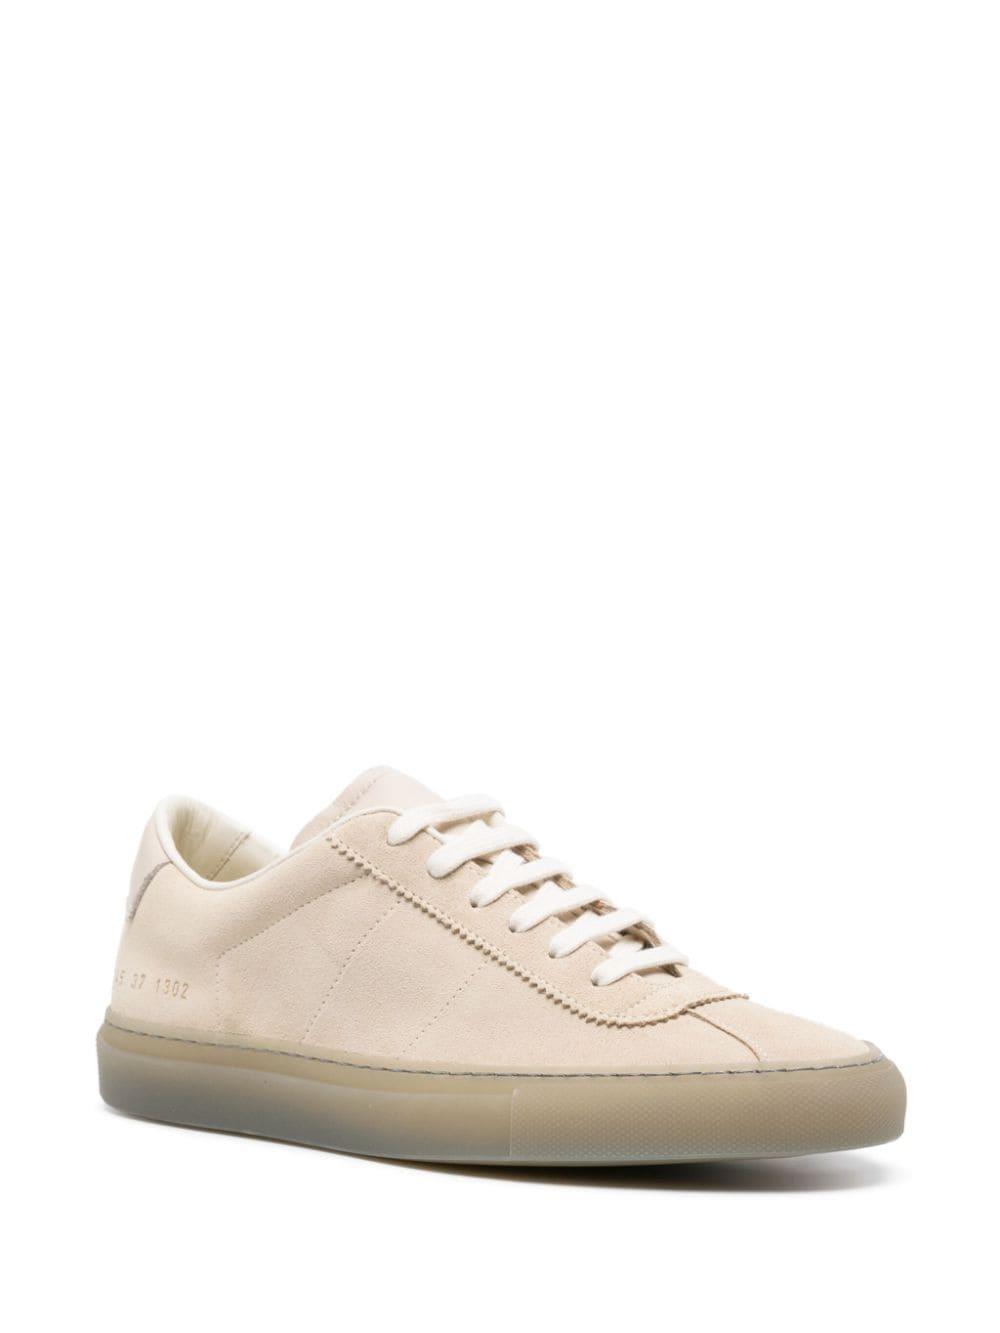 Common Projects stamped-numbers suede sneakers - Neutrals